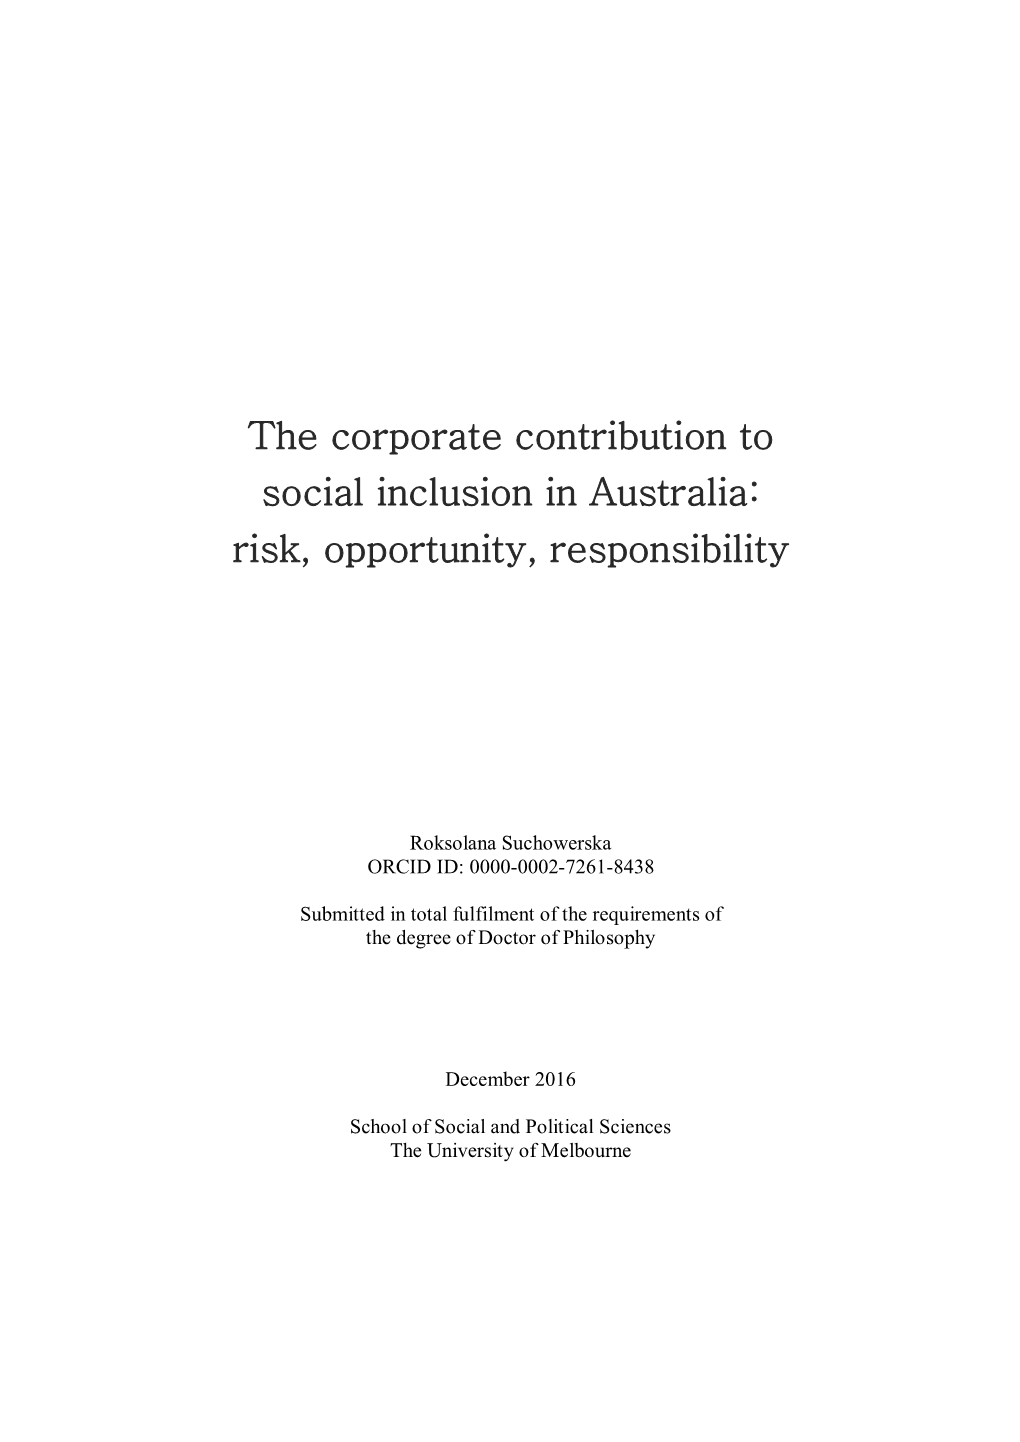 The Corporate Contribution to Social Inclusion in Australia: Risk, Opportunity, Responsibility